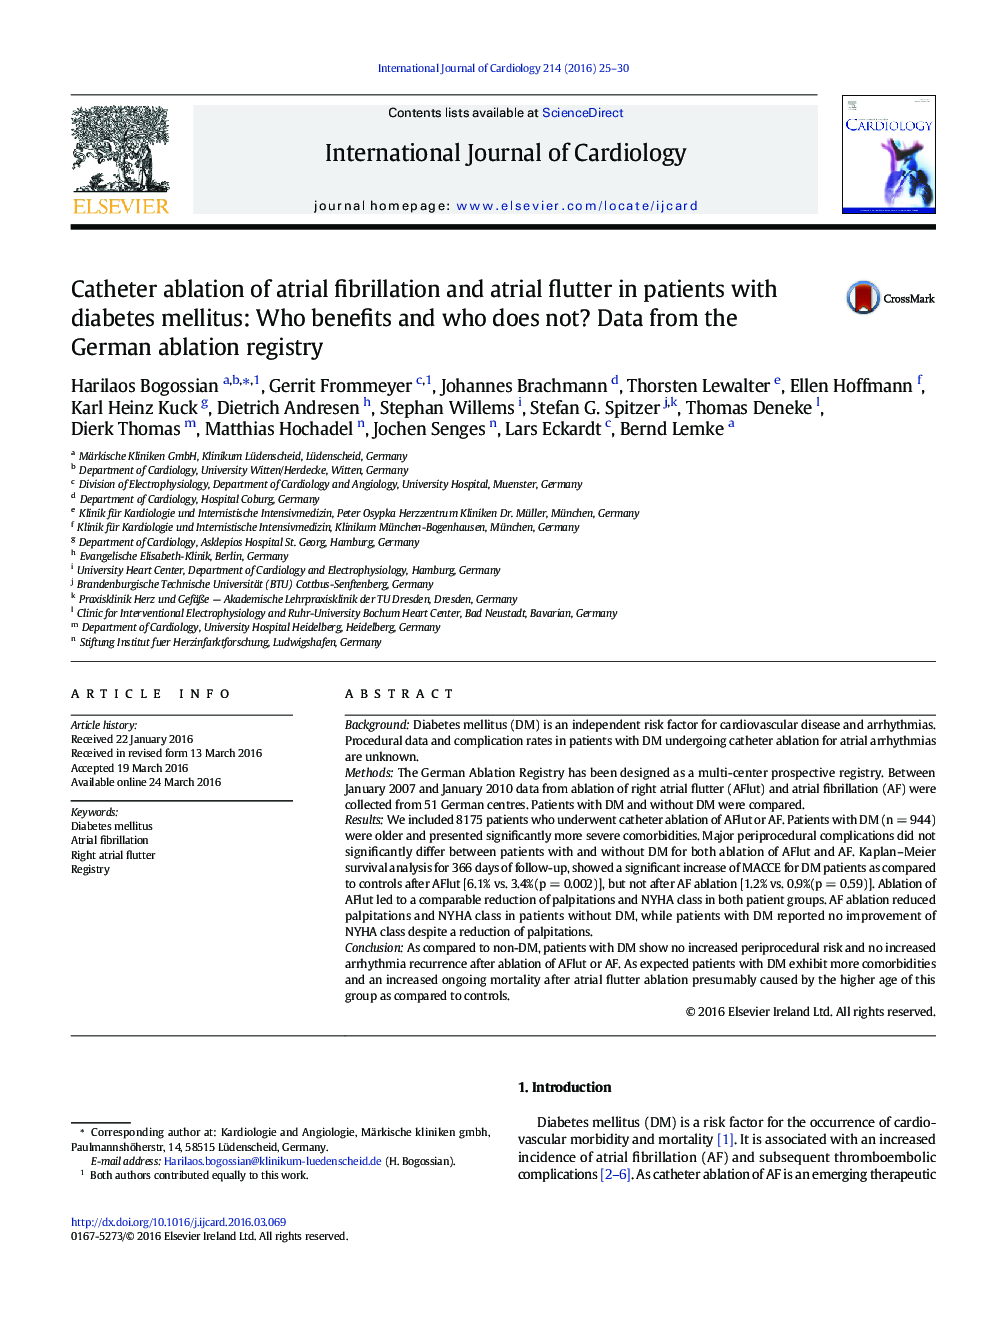 Catheter ablation of atrial fibrillation and atrial flutter in patients with diabetes mellitus: Who benefits and who does not? Data from the German ablation registry